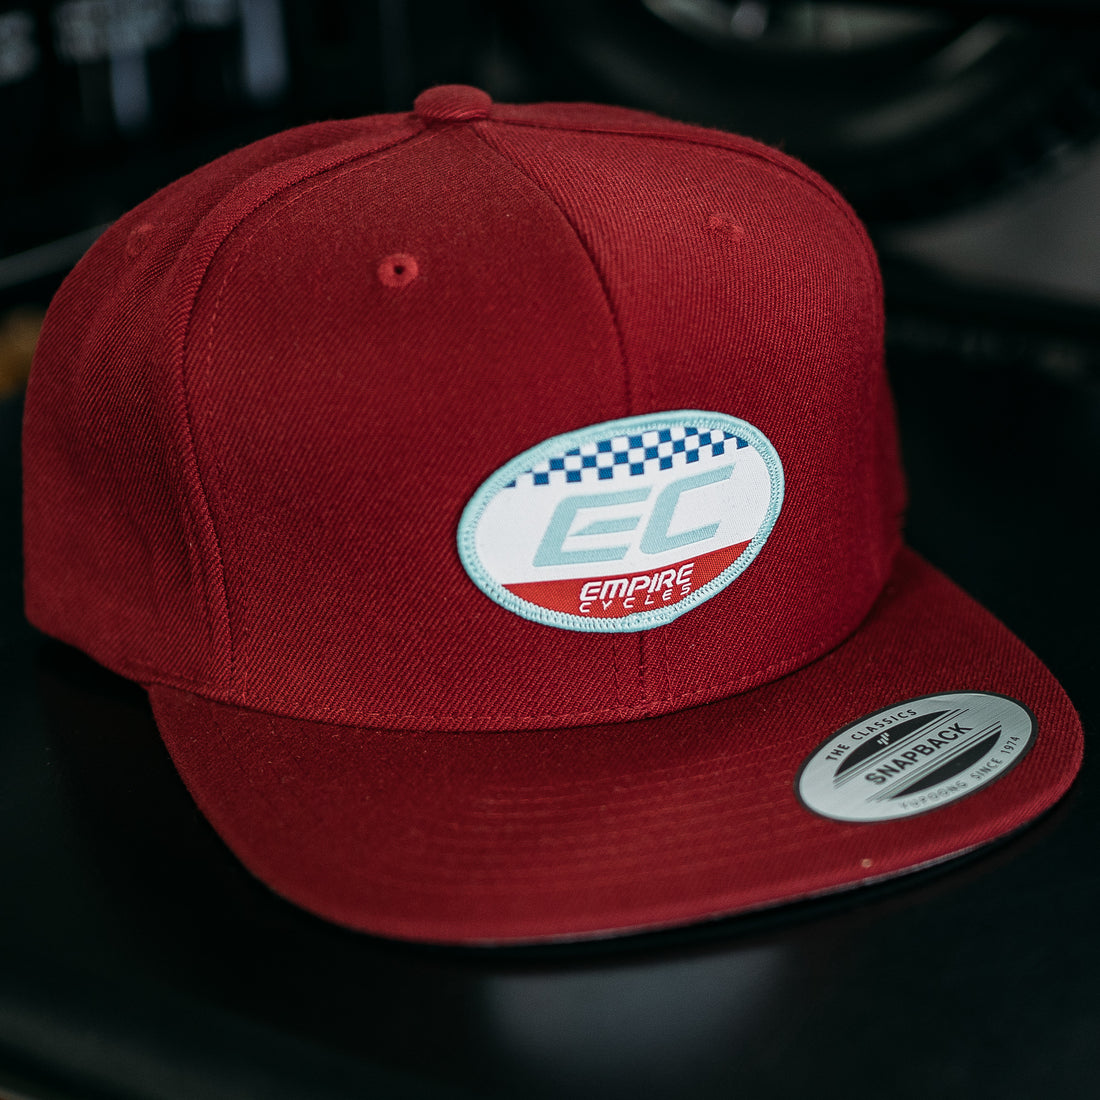 Empire Cycles Snapback Hat - Checkers